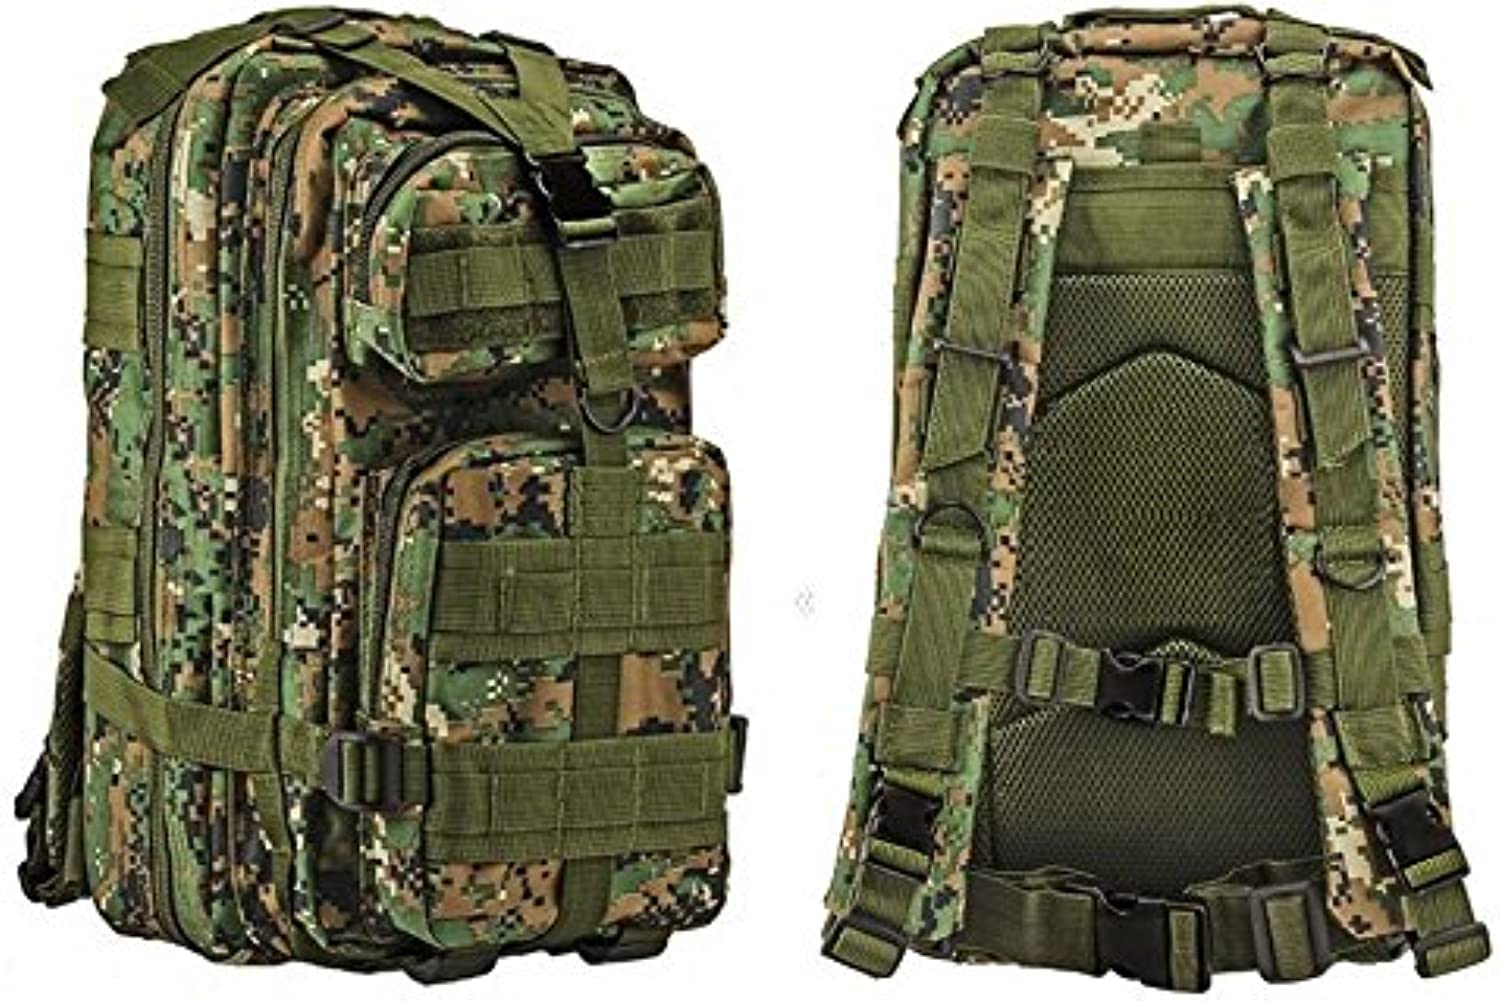 Ultimate Arms Gear Tactical Marpat Woodland Digital Camouflage Compact Level 3 Assault Backpack 3 Day Bug Out Bag with Adjustable Slip Shoulder Length Straps MOLLE Modular PALS Heavy Duty Pack